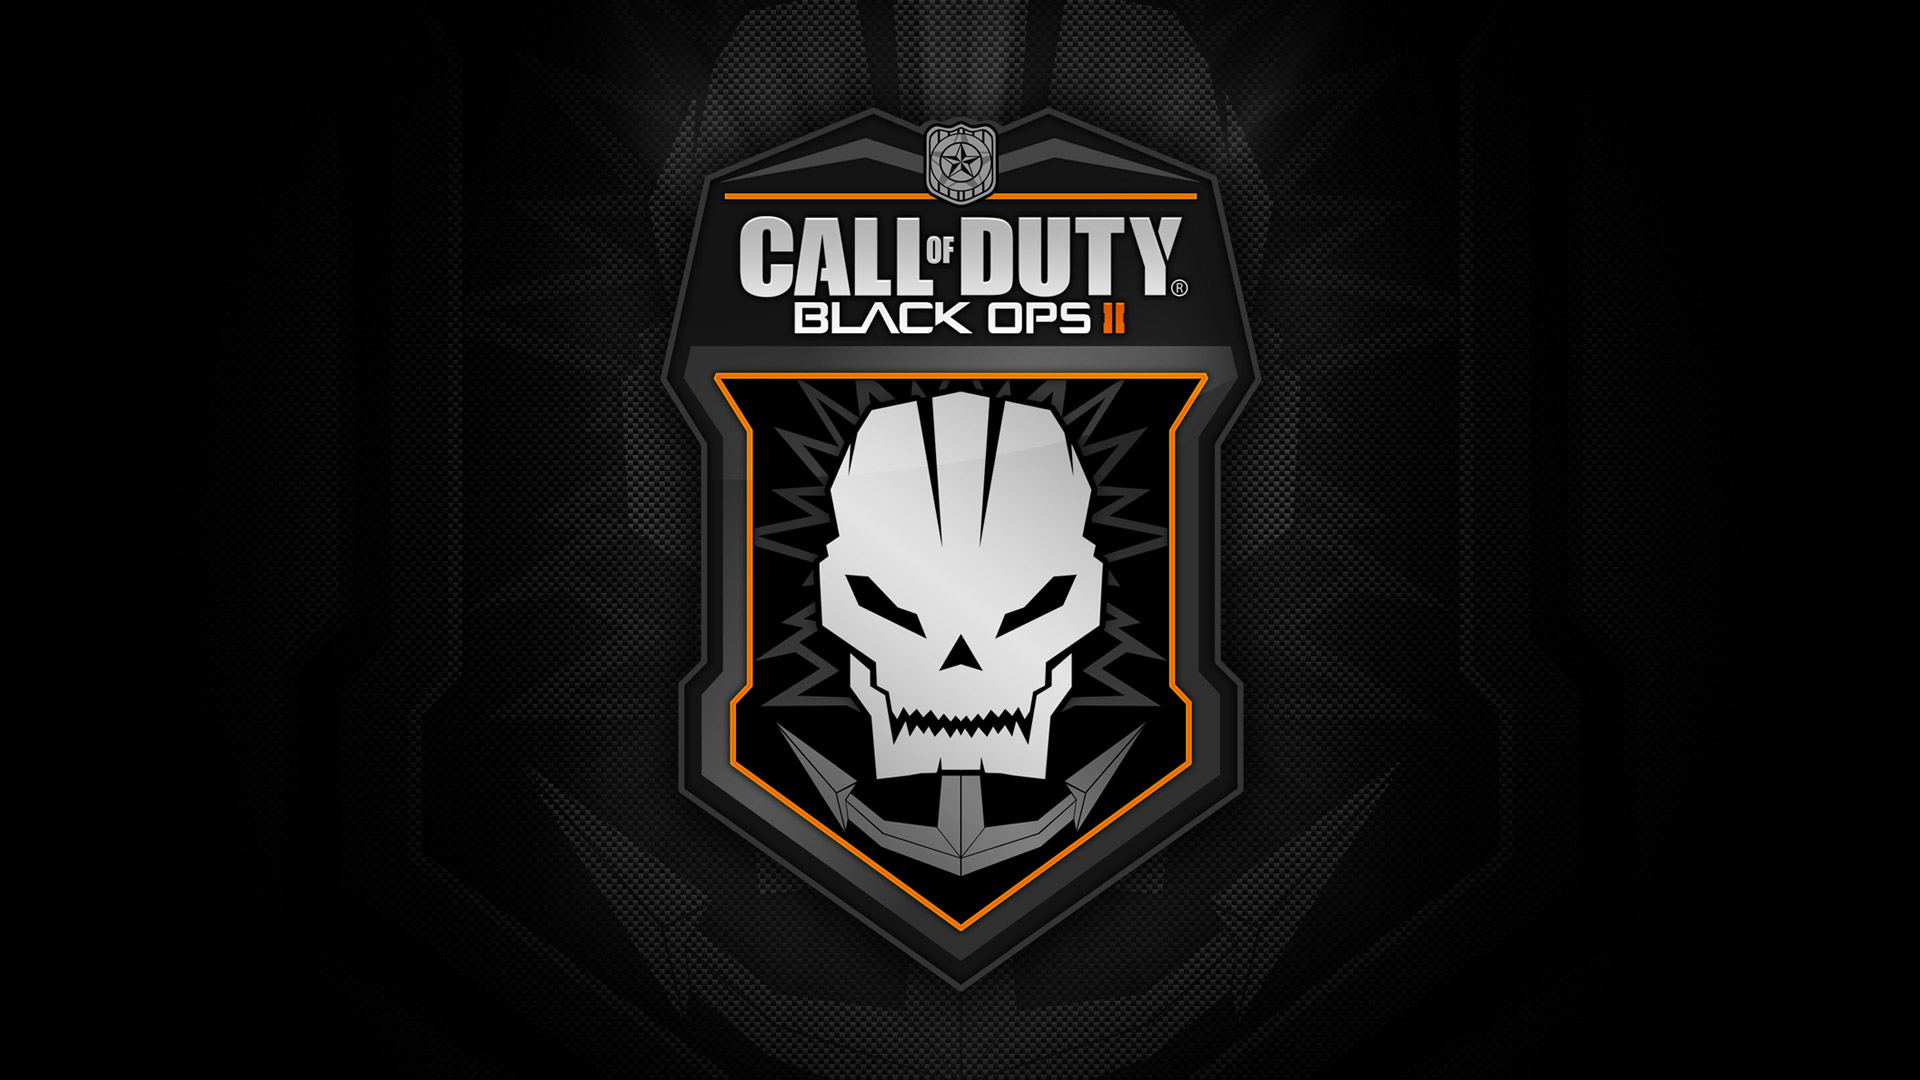 Free Call of Duty Black Ops 2 Wallpaper in 1920x1080